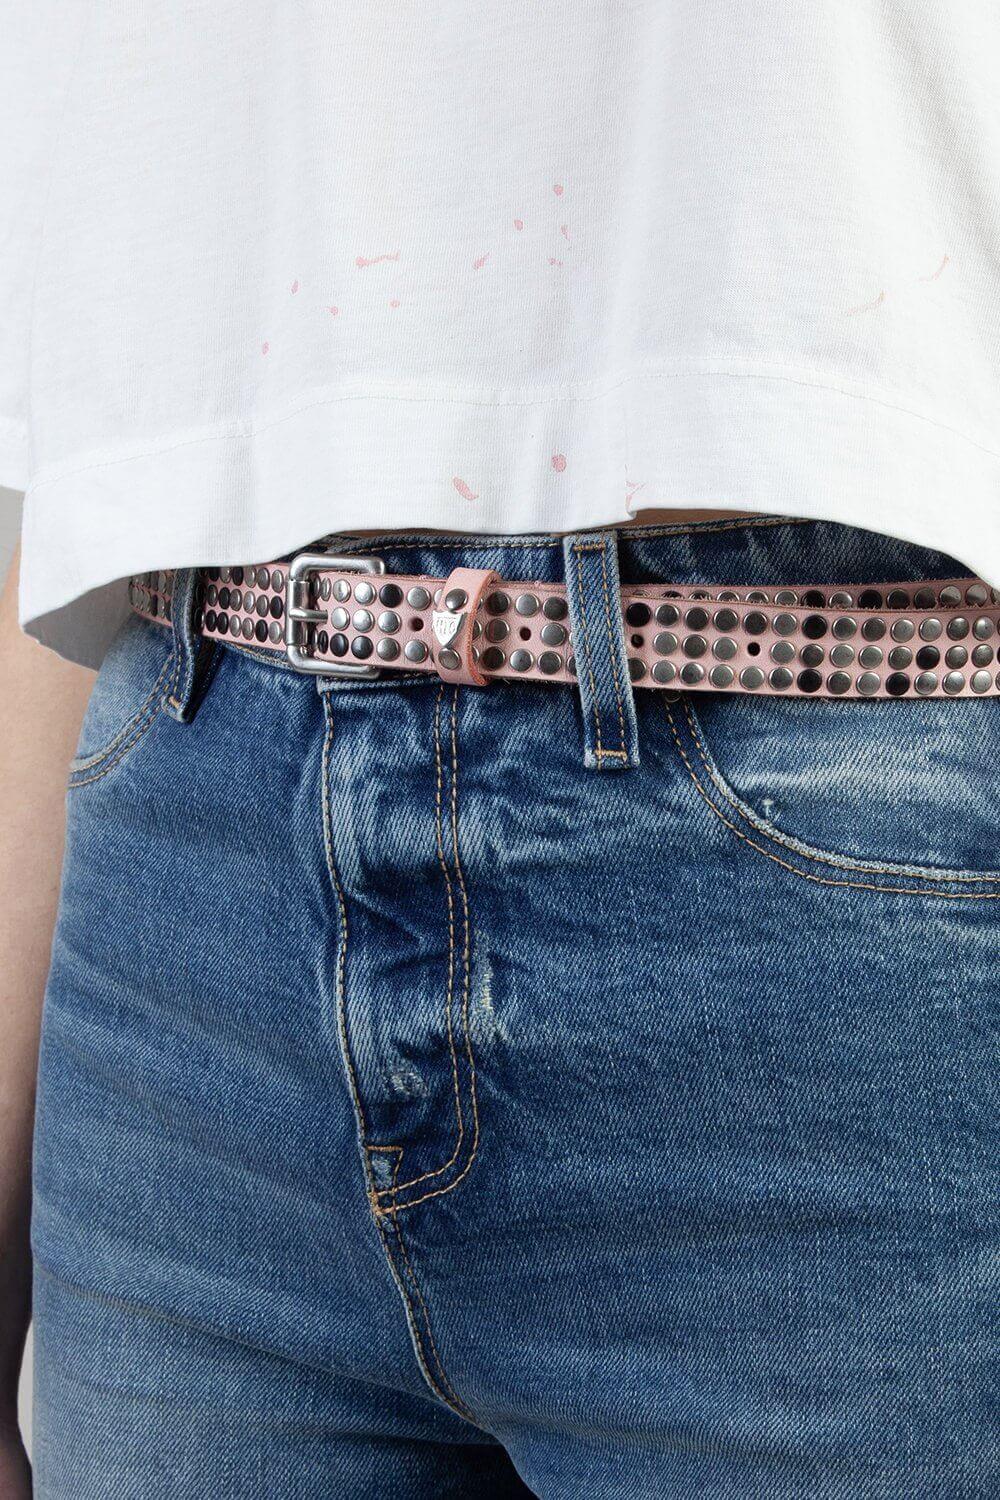 3.000 STUDS COLOR BELT Pink leather belt with studs, brass buckle, studded zamac belt loop and rivet with HTC logo. Height: 2 cm. Made in Italy. HTC LOS ANGELES